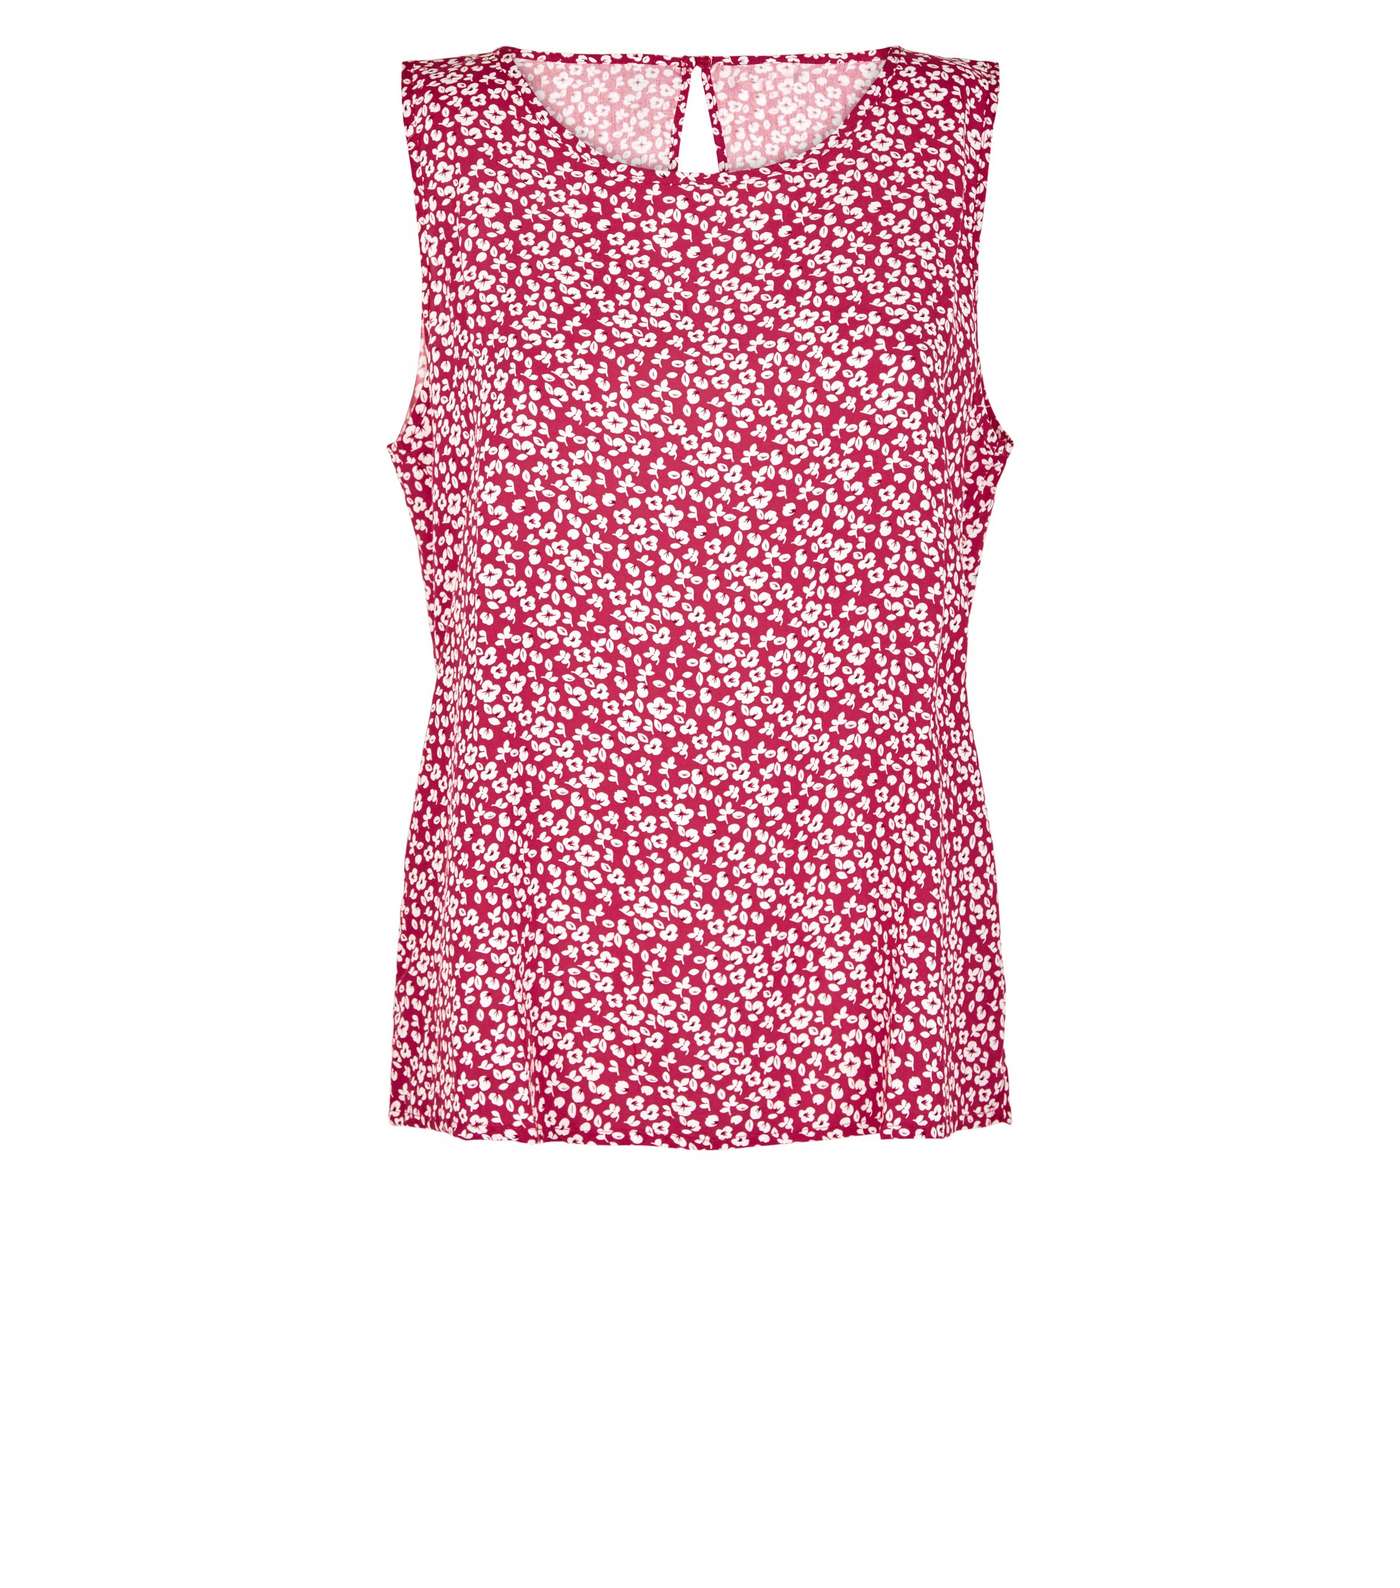 JDY Pink Floral Sleeveless Top Image 4